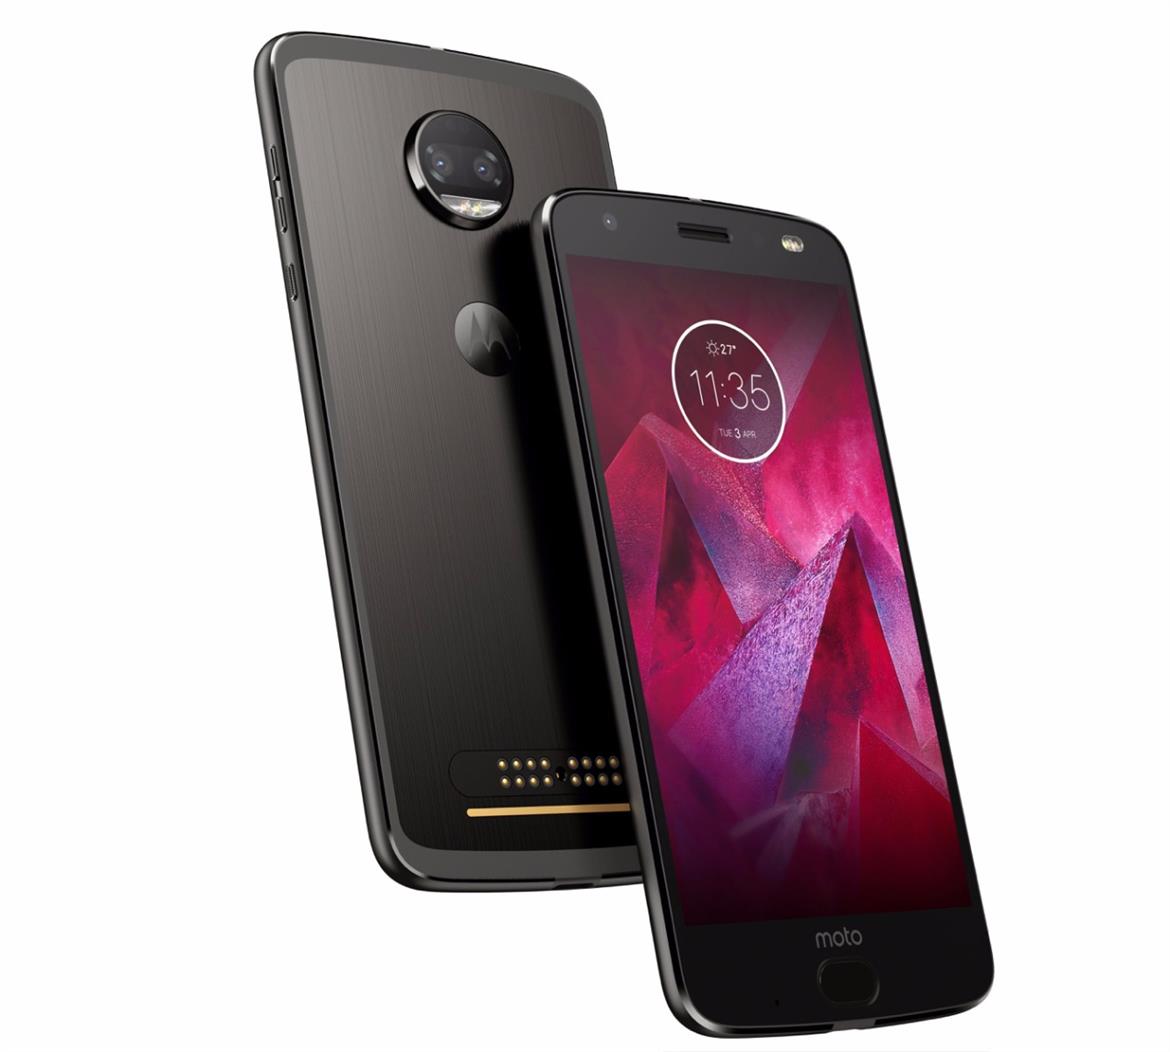 Motorola Moto Z2 Force Arrives August 10 For All Carriers, 360-Degree Camera Moto Mod Unveiled